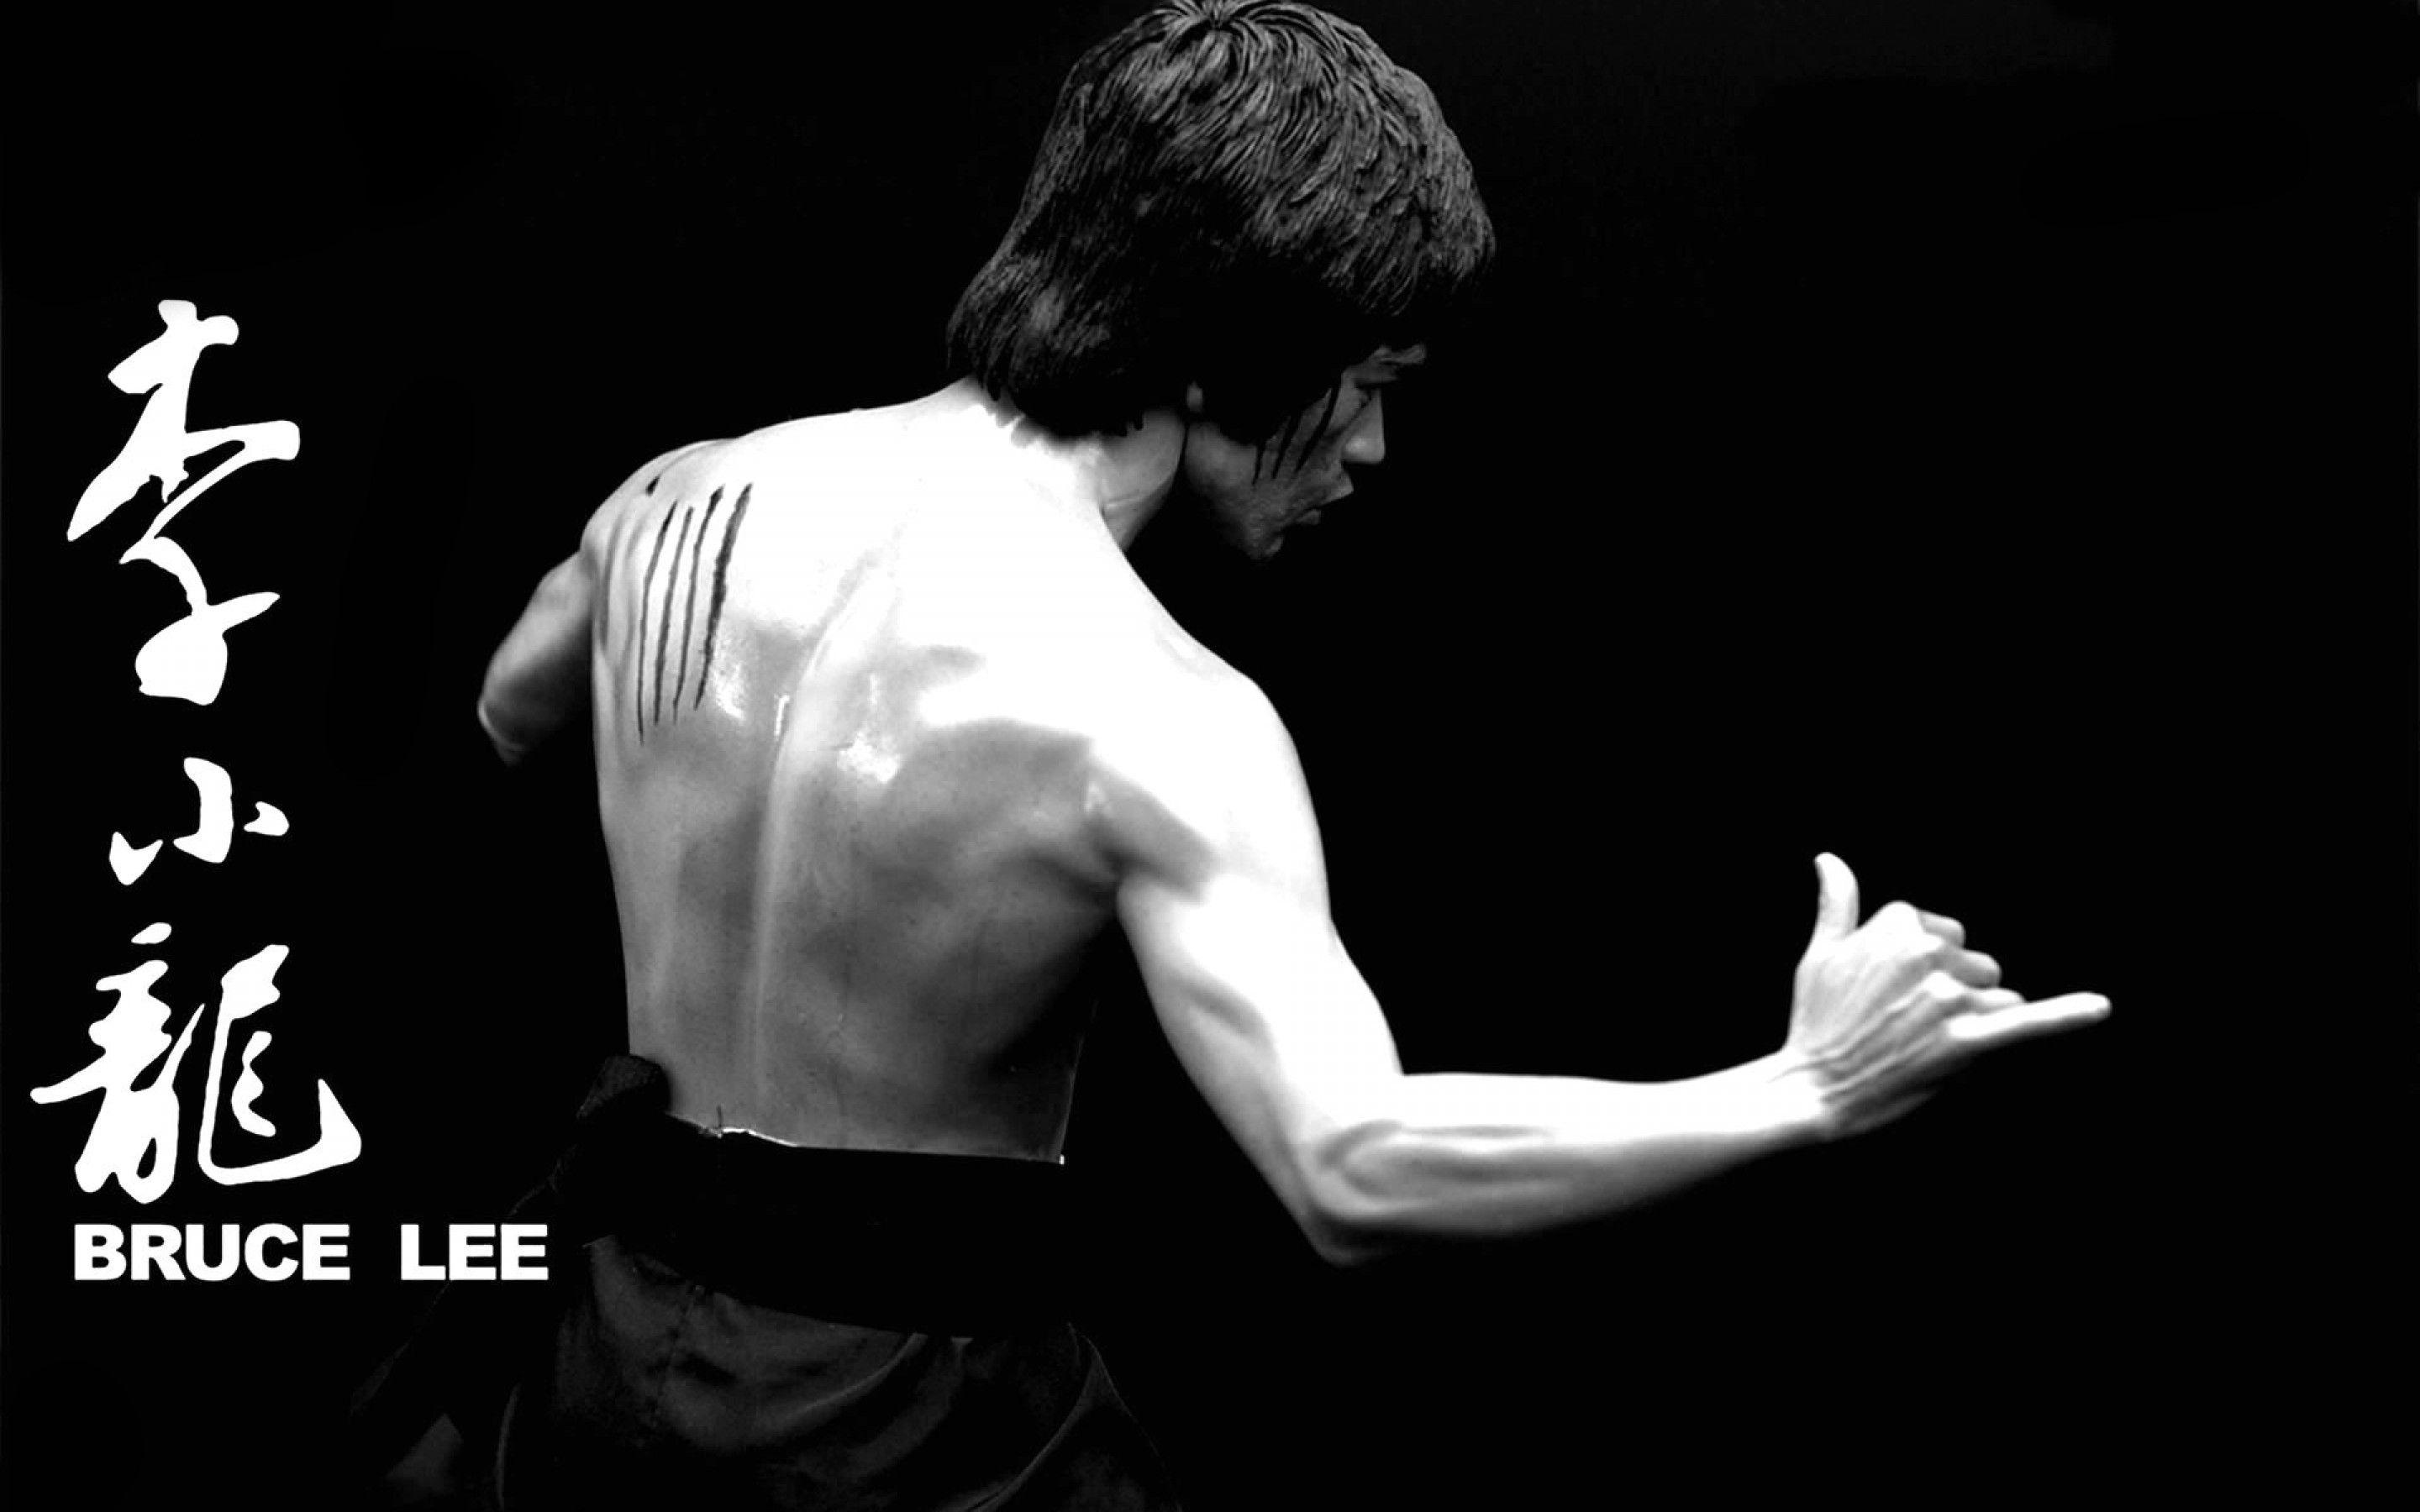 Bruce Lee HD Wallpaper for Android Free Download on MoboMarket. HD